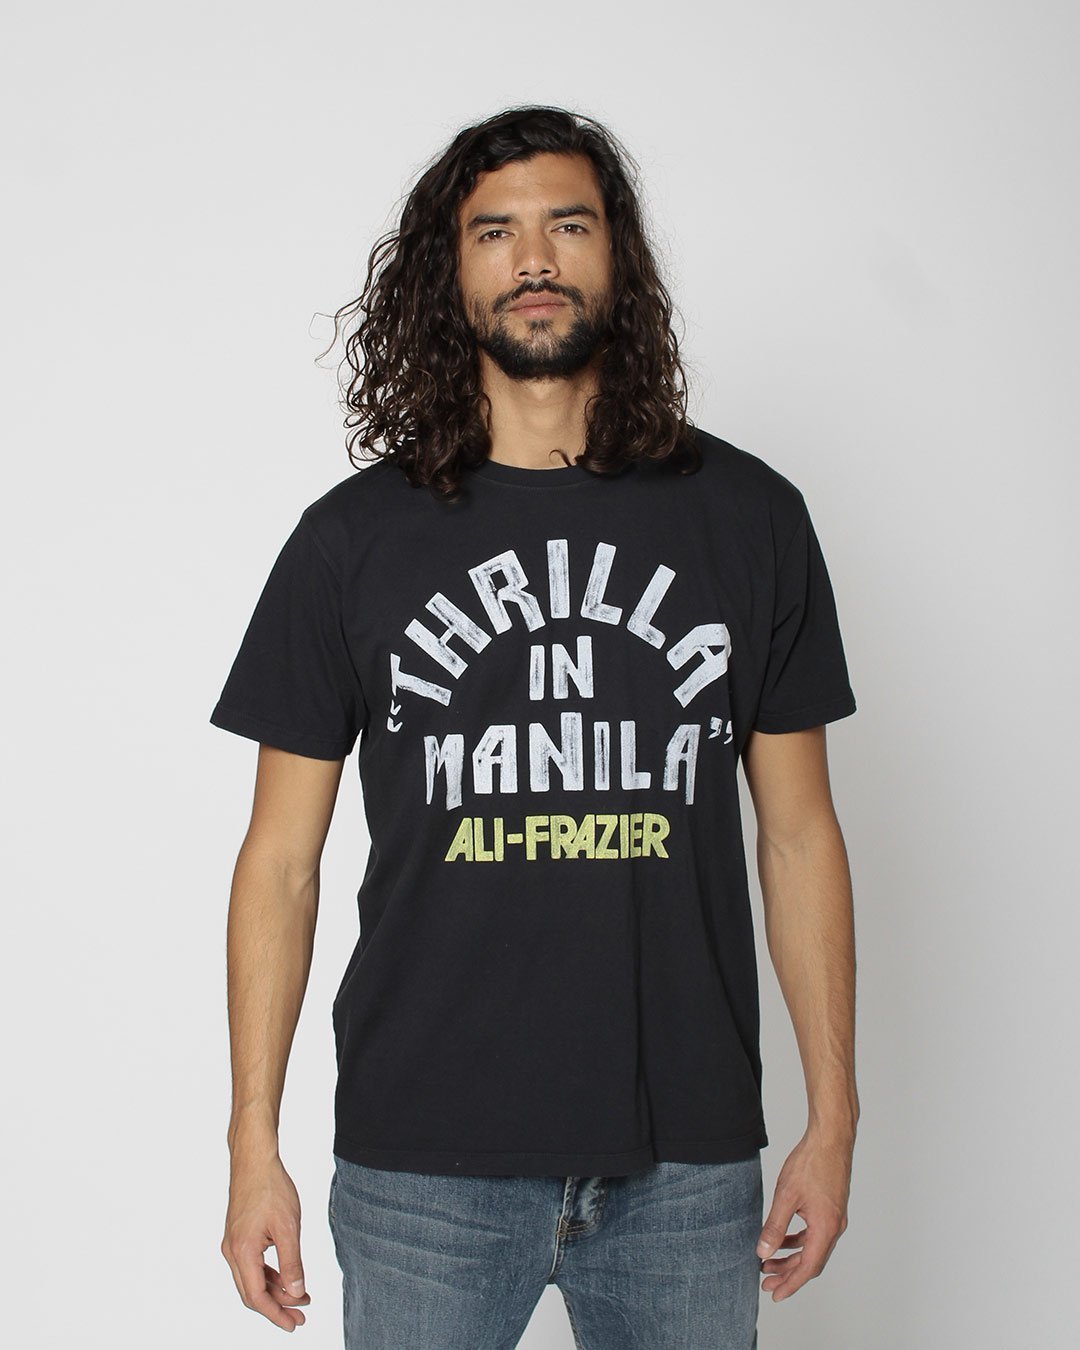 Thrilla in Manila Philippines Tee - Roots of Fight Canada